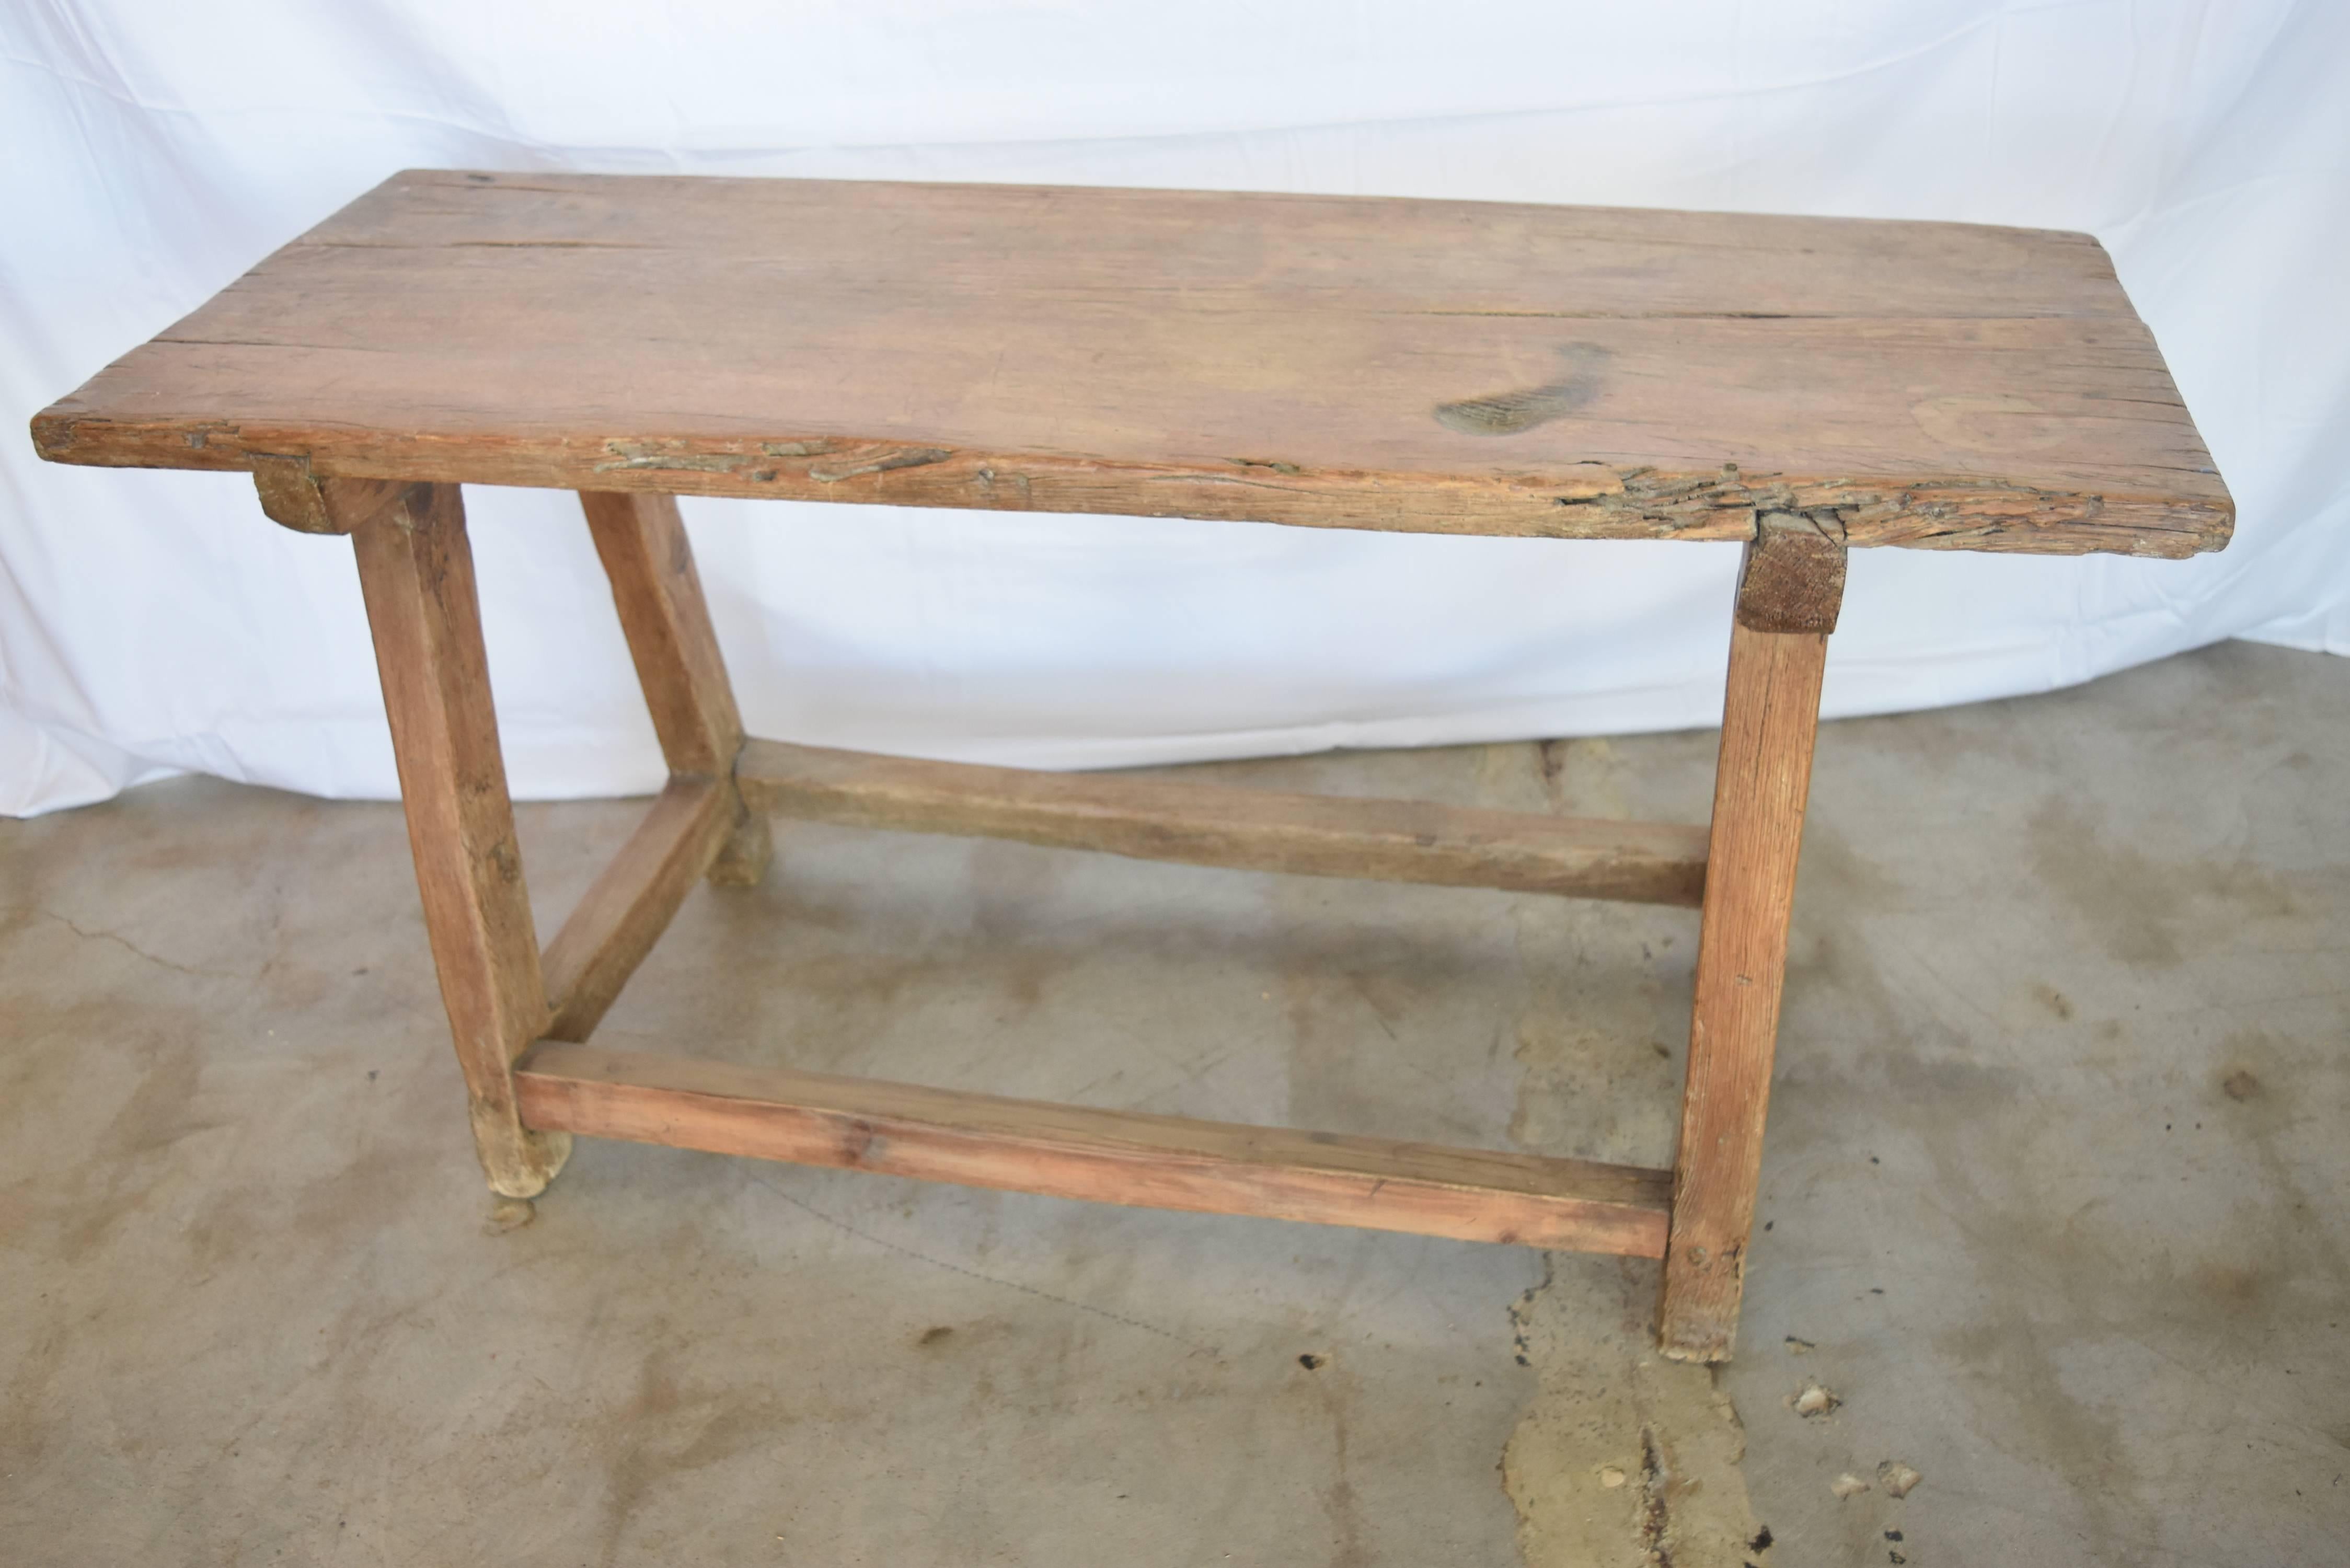 19th Century Spanish Primitive Chestnut Table/Bench Pegged and Tongue and Groove 1